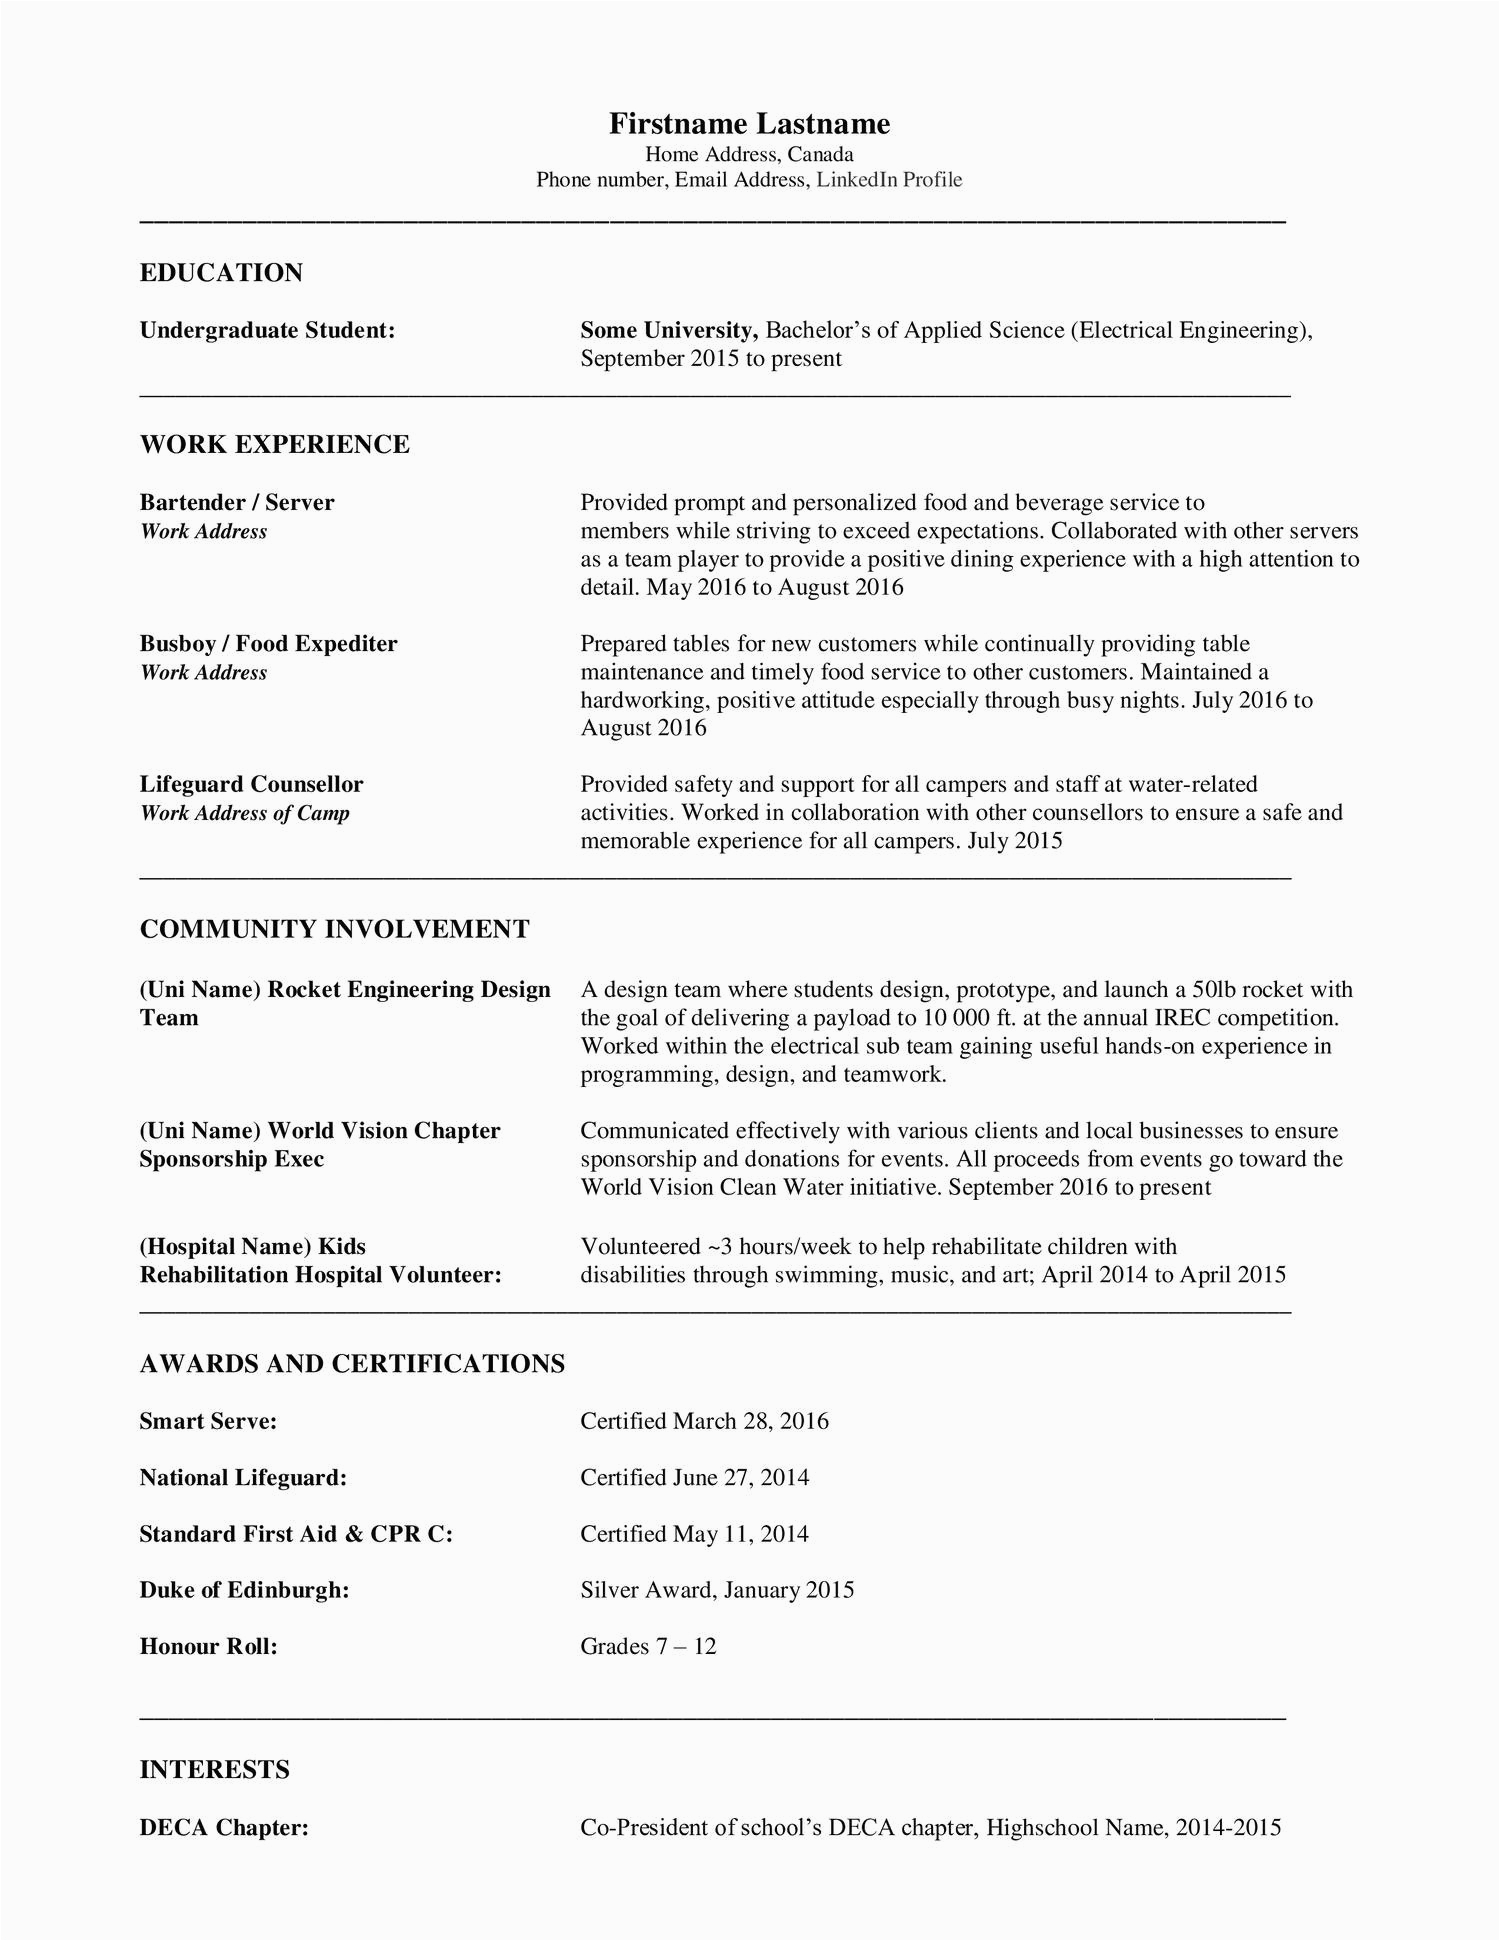 Sample Resumes for Electrical Engineers Freshers Students Electrical Engineering Student Resume Pdf